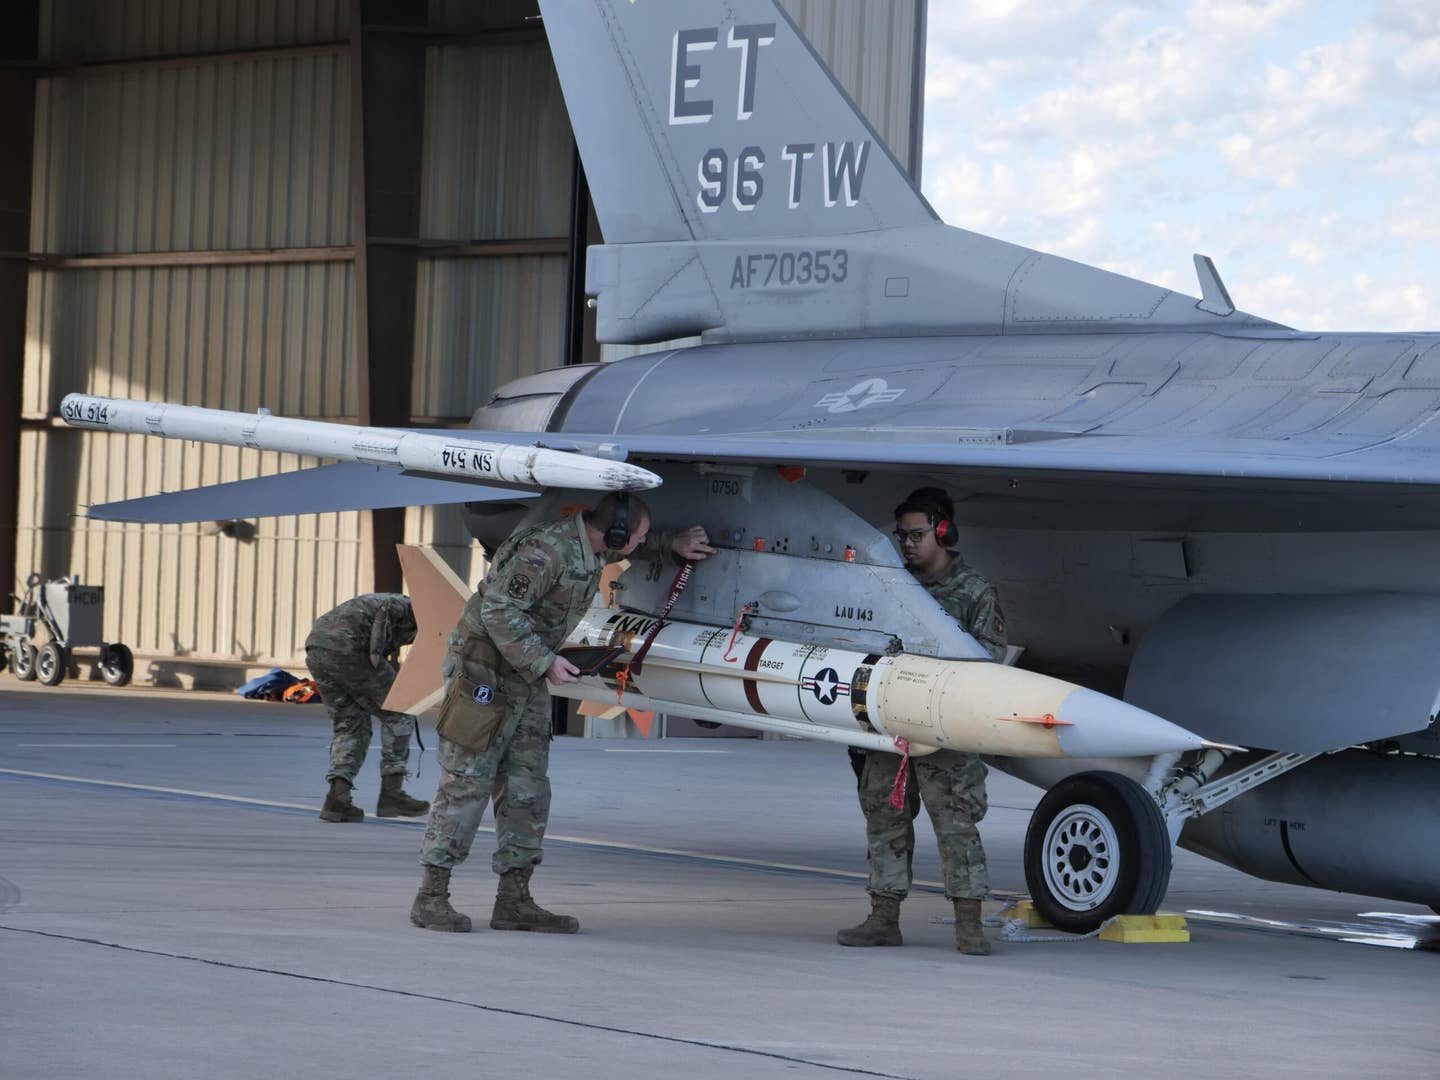 A crew from Eglin Air Force Base 96th Wing loads an AQM-37 target on an F-16 aircraft in support of the U.S. Army’s Integrated Fires Mission Command operations. <em>Credit: U.S. Army</em>